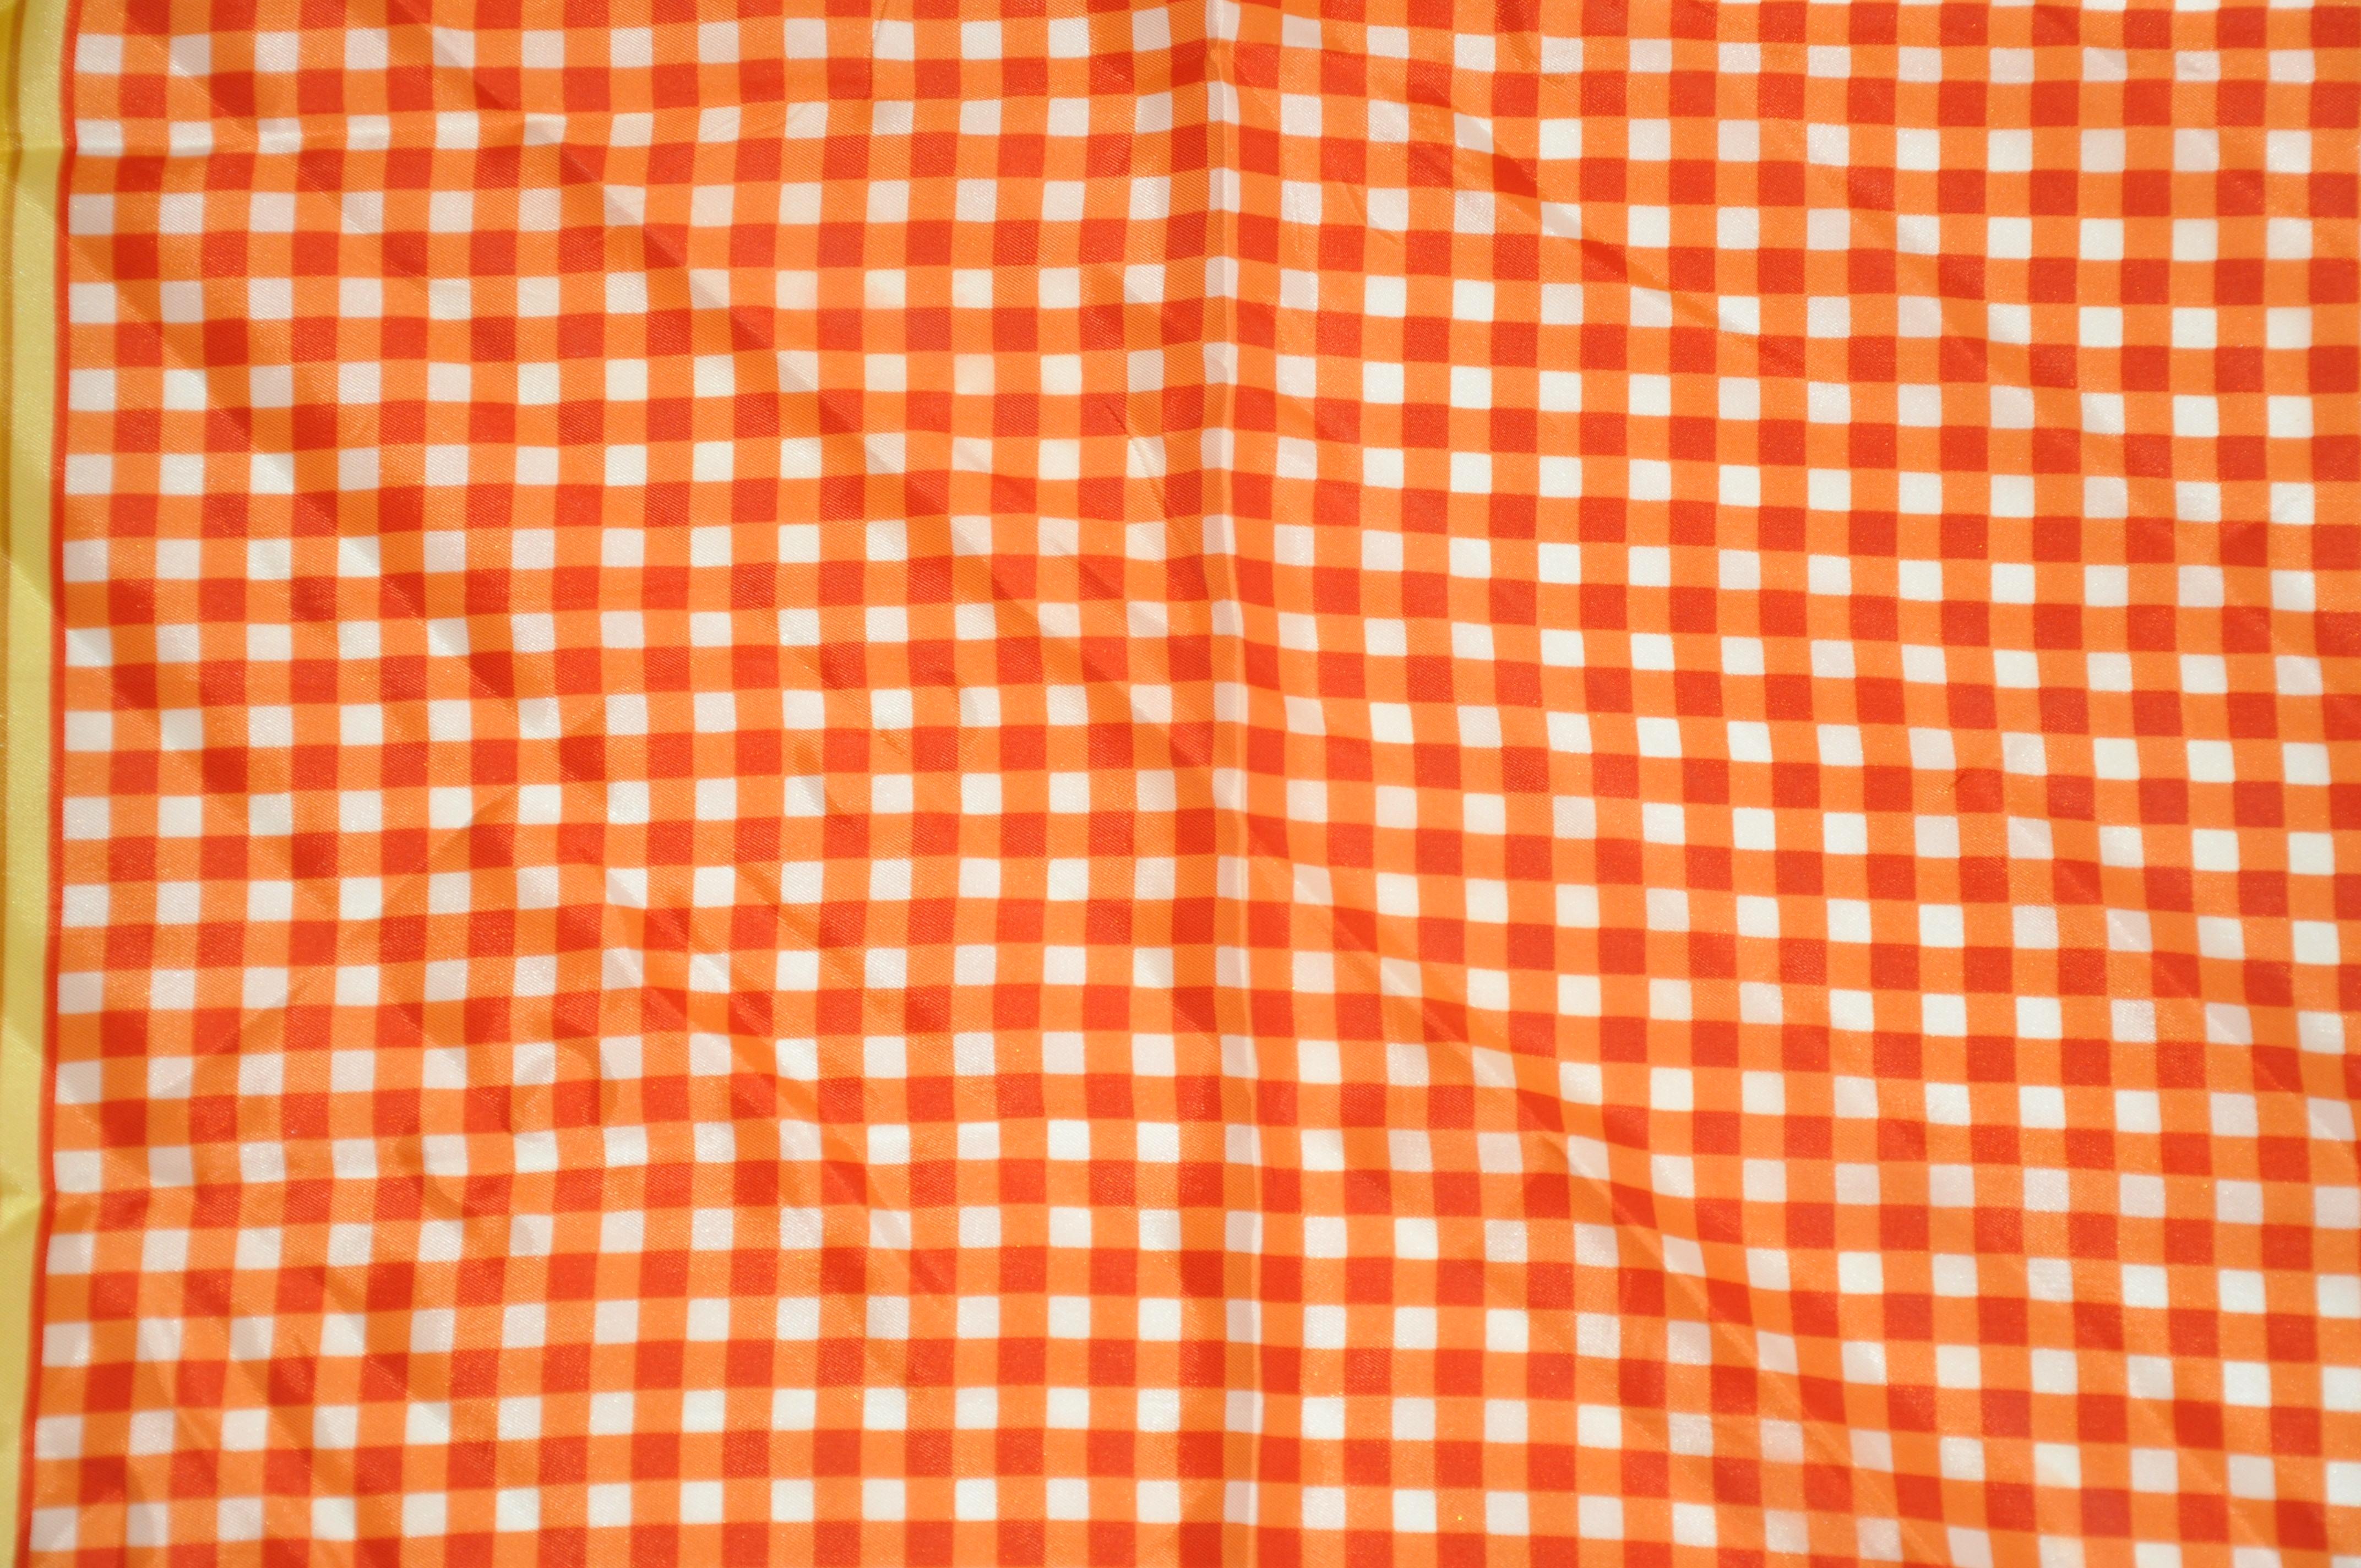 Glentex Multi-Stripe Borders with Red, Tangerine & White Checker Center Scarf In Good Condition For Sale In New York, NY